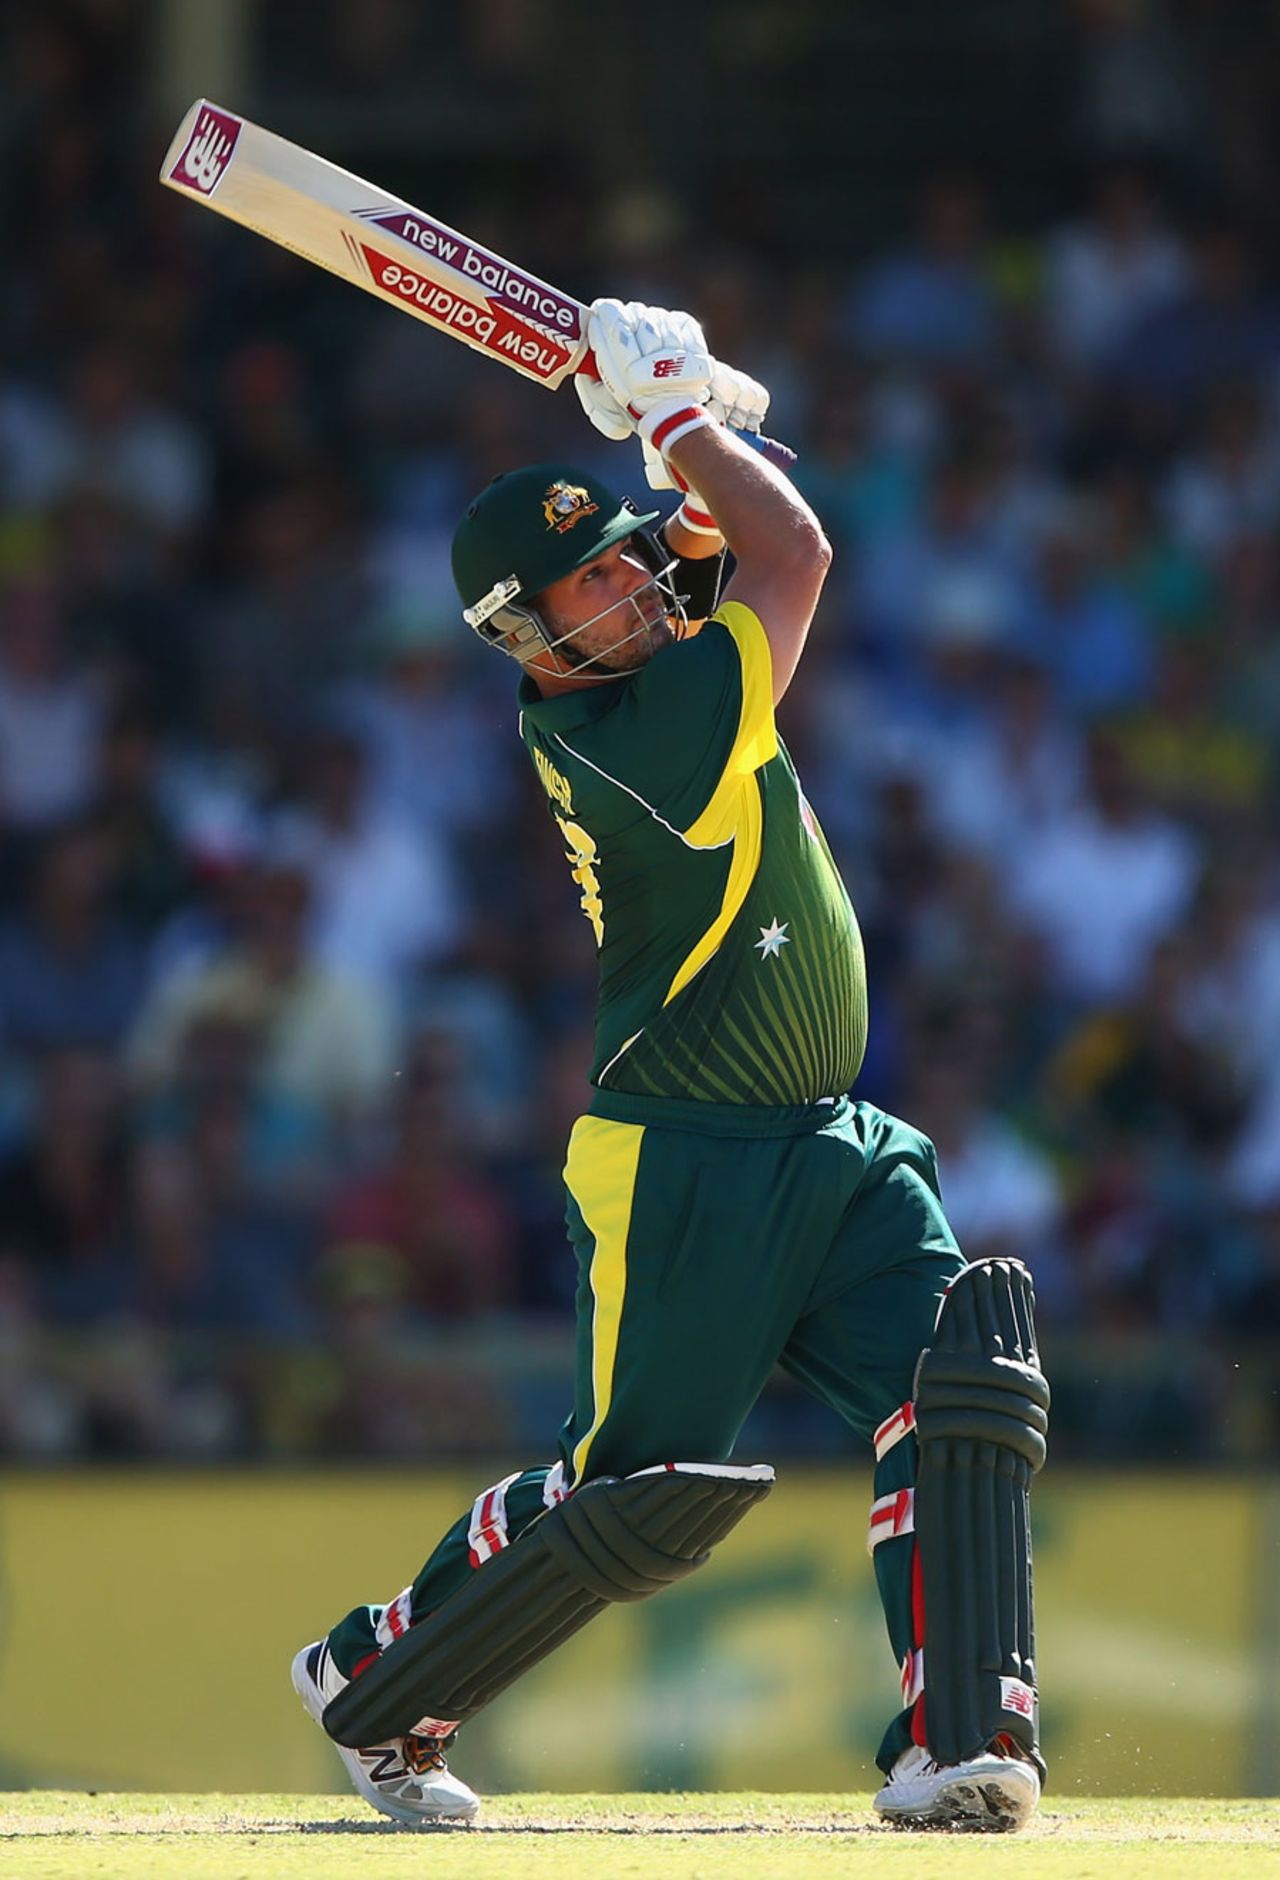 Aaron Finch launches one down the ground, Australia v England, 4th ODI, Perth, January 24, 2014